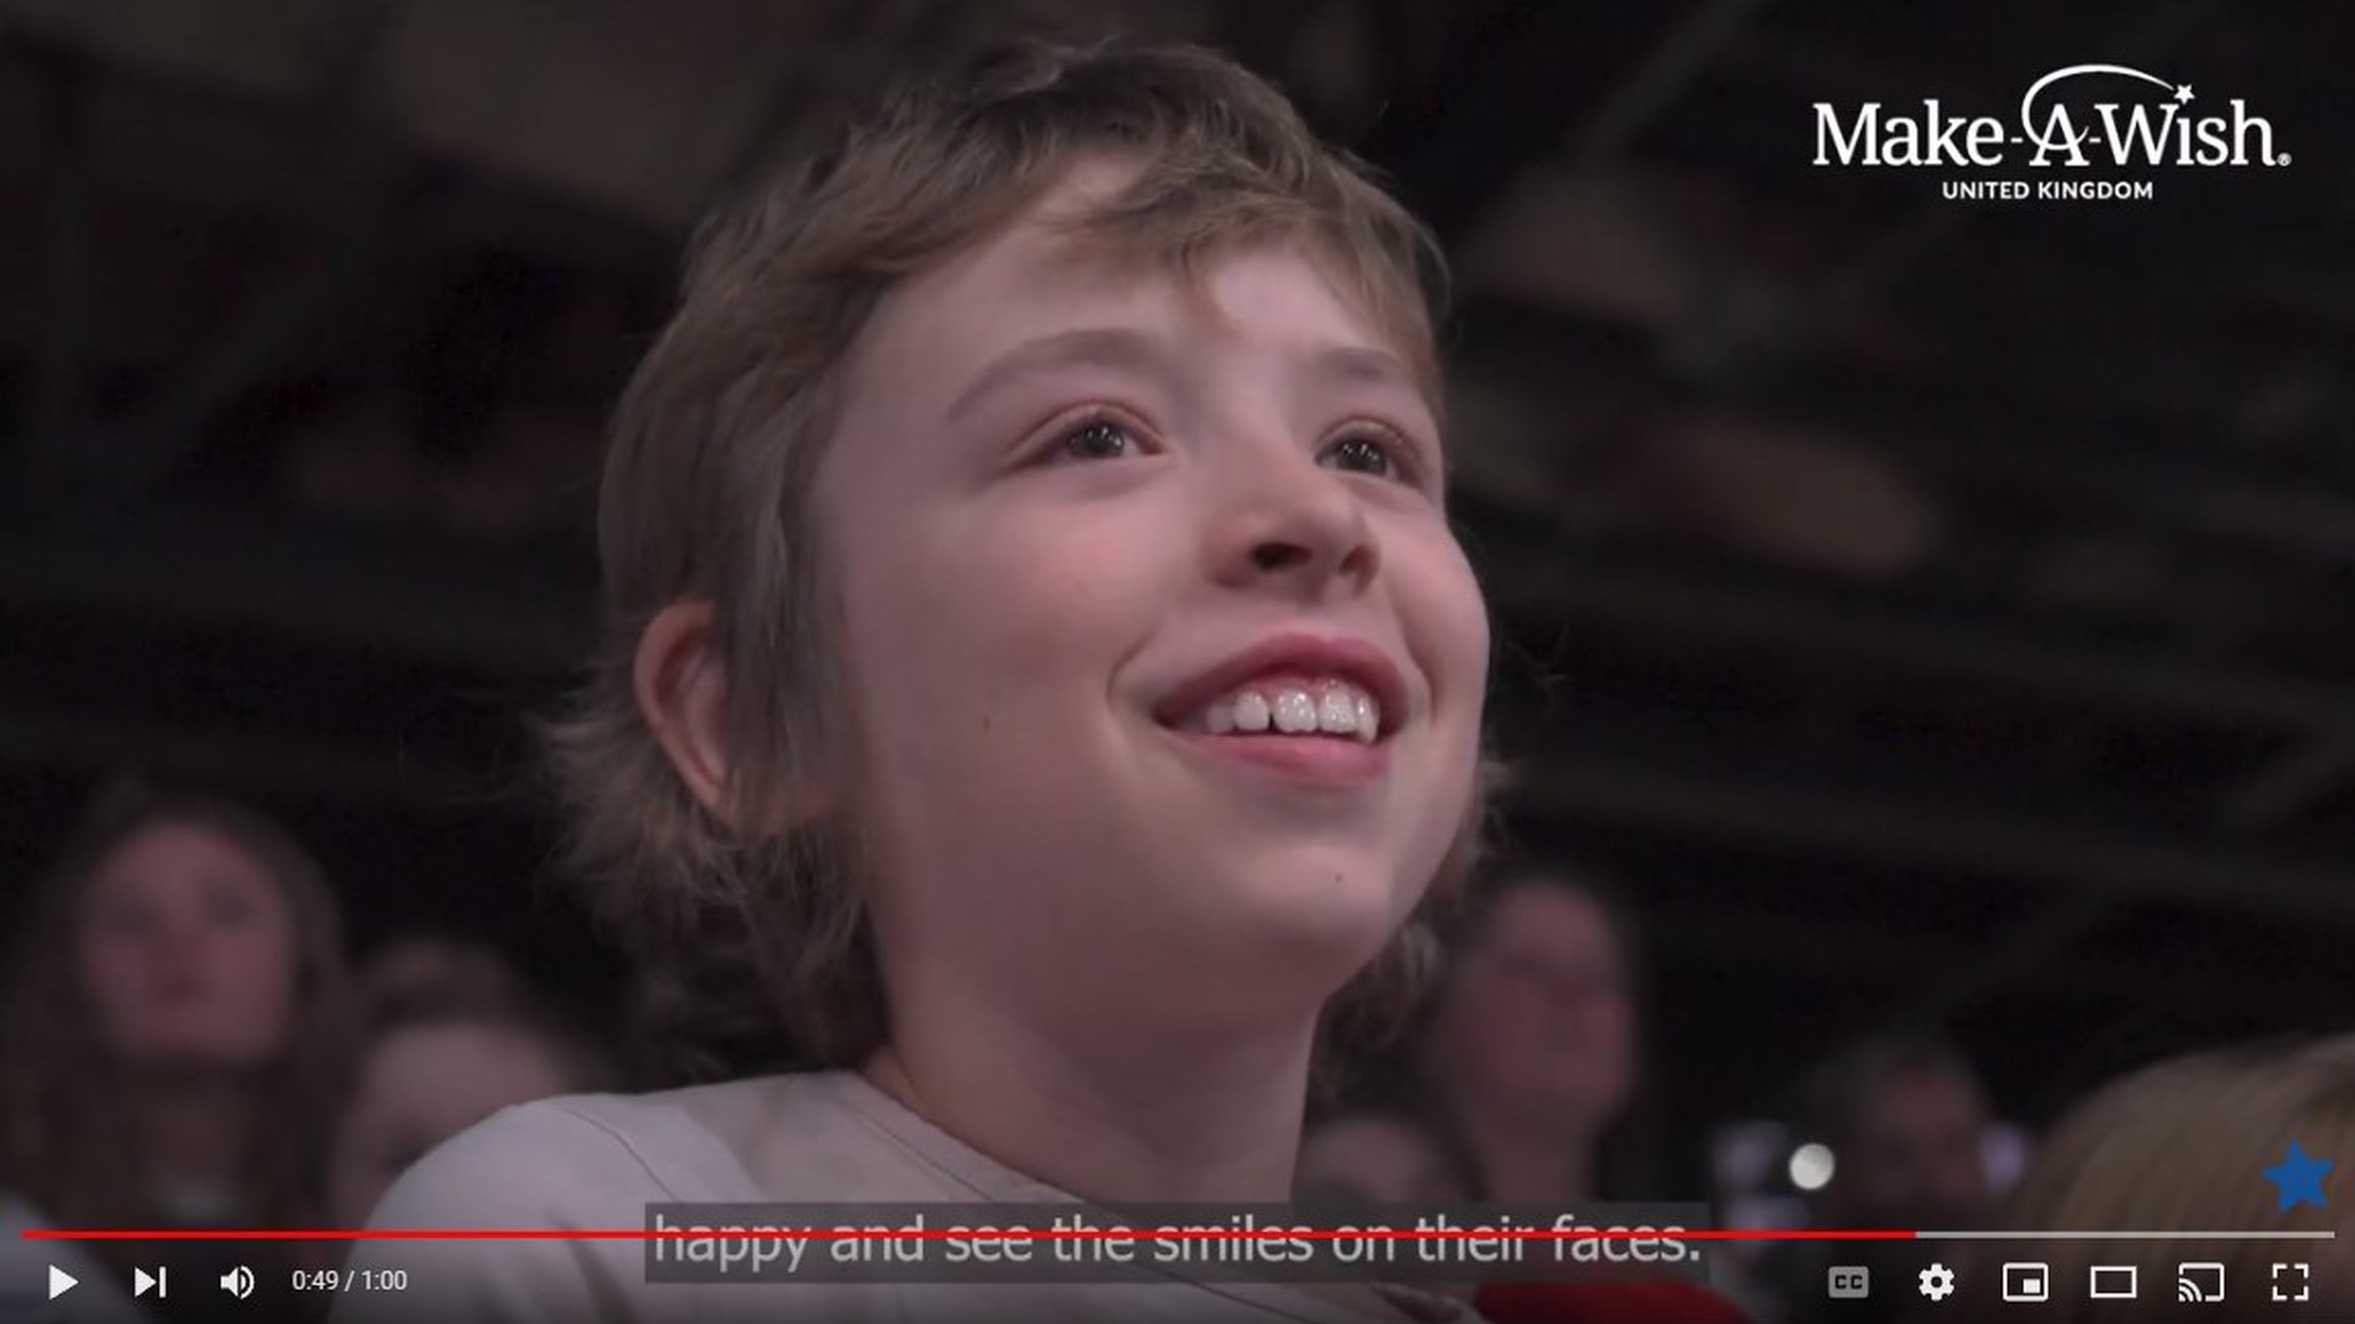 A still from a video of Amber's wish, showing her smiling as she watches an equestrian display.